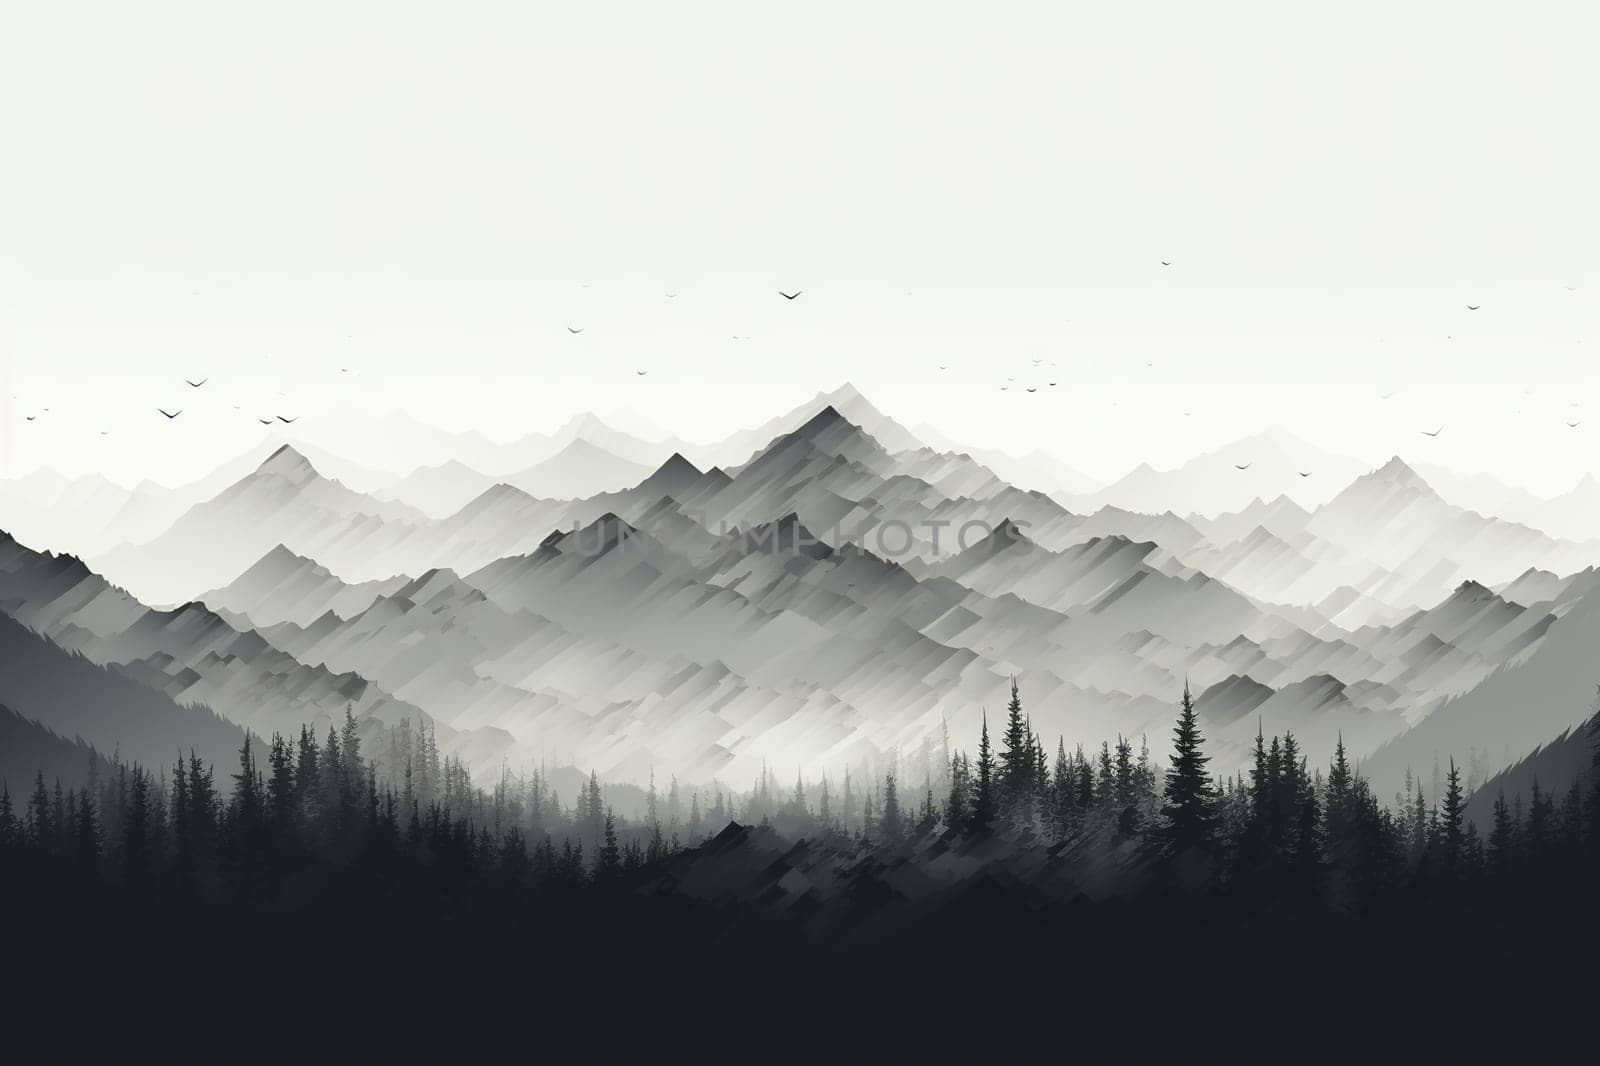 Drawing of mountains in black and white. Horizontal mountain landscape.